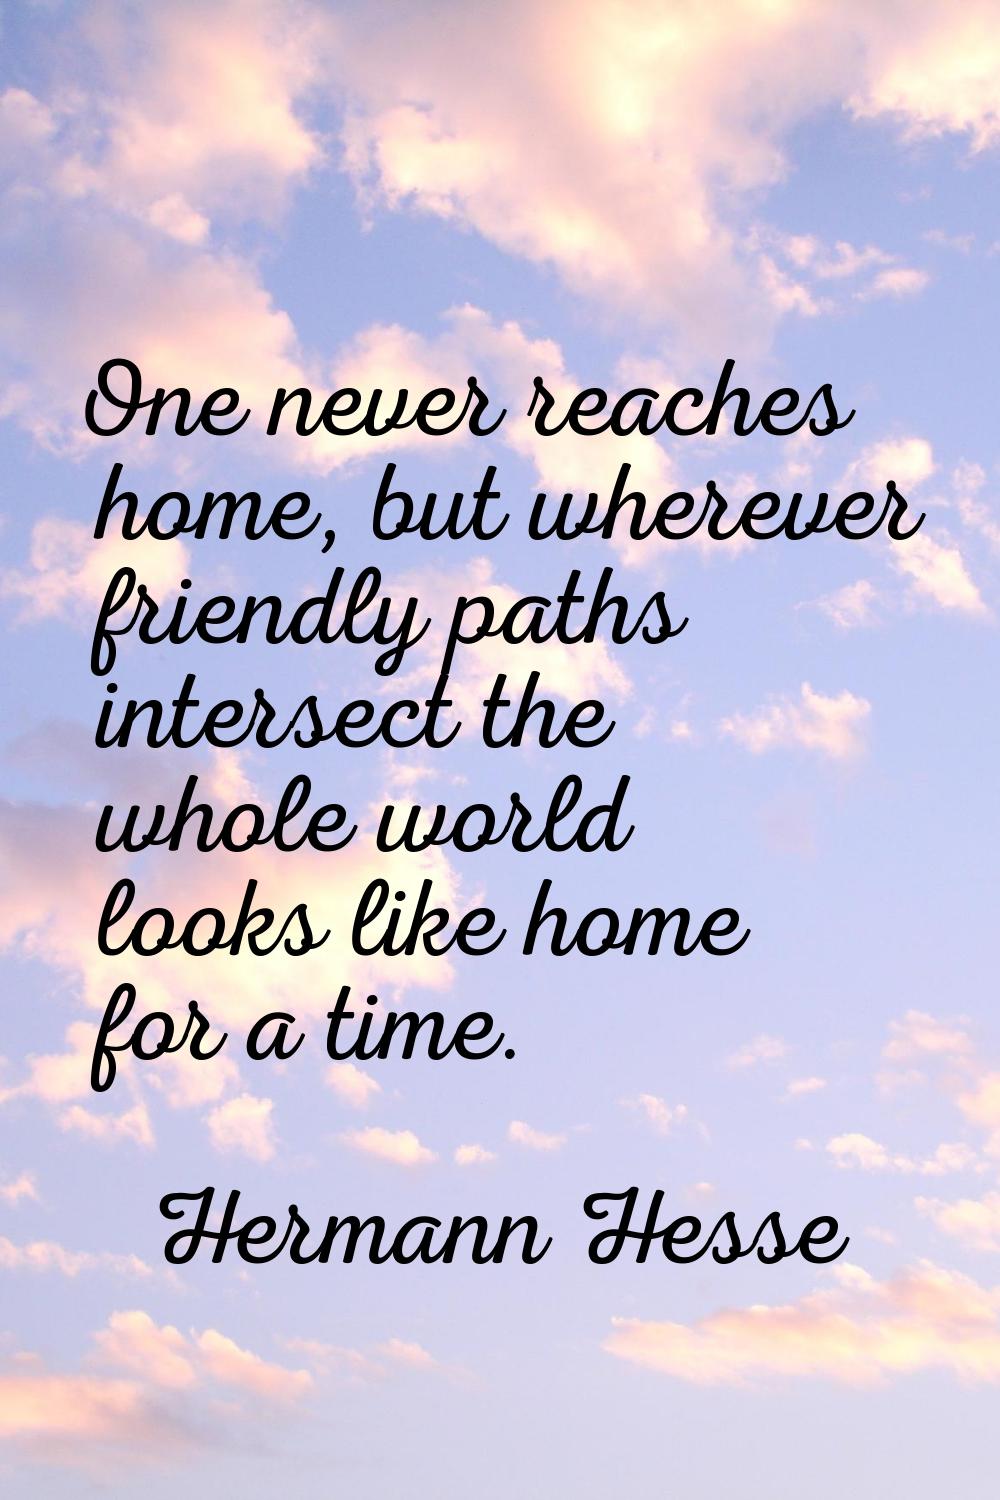 One never reaches home, but wherever friendly paths intersect the whole world looks like home for a